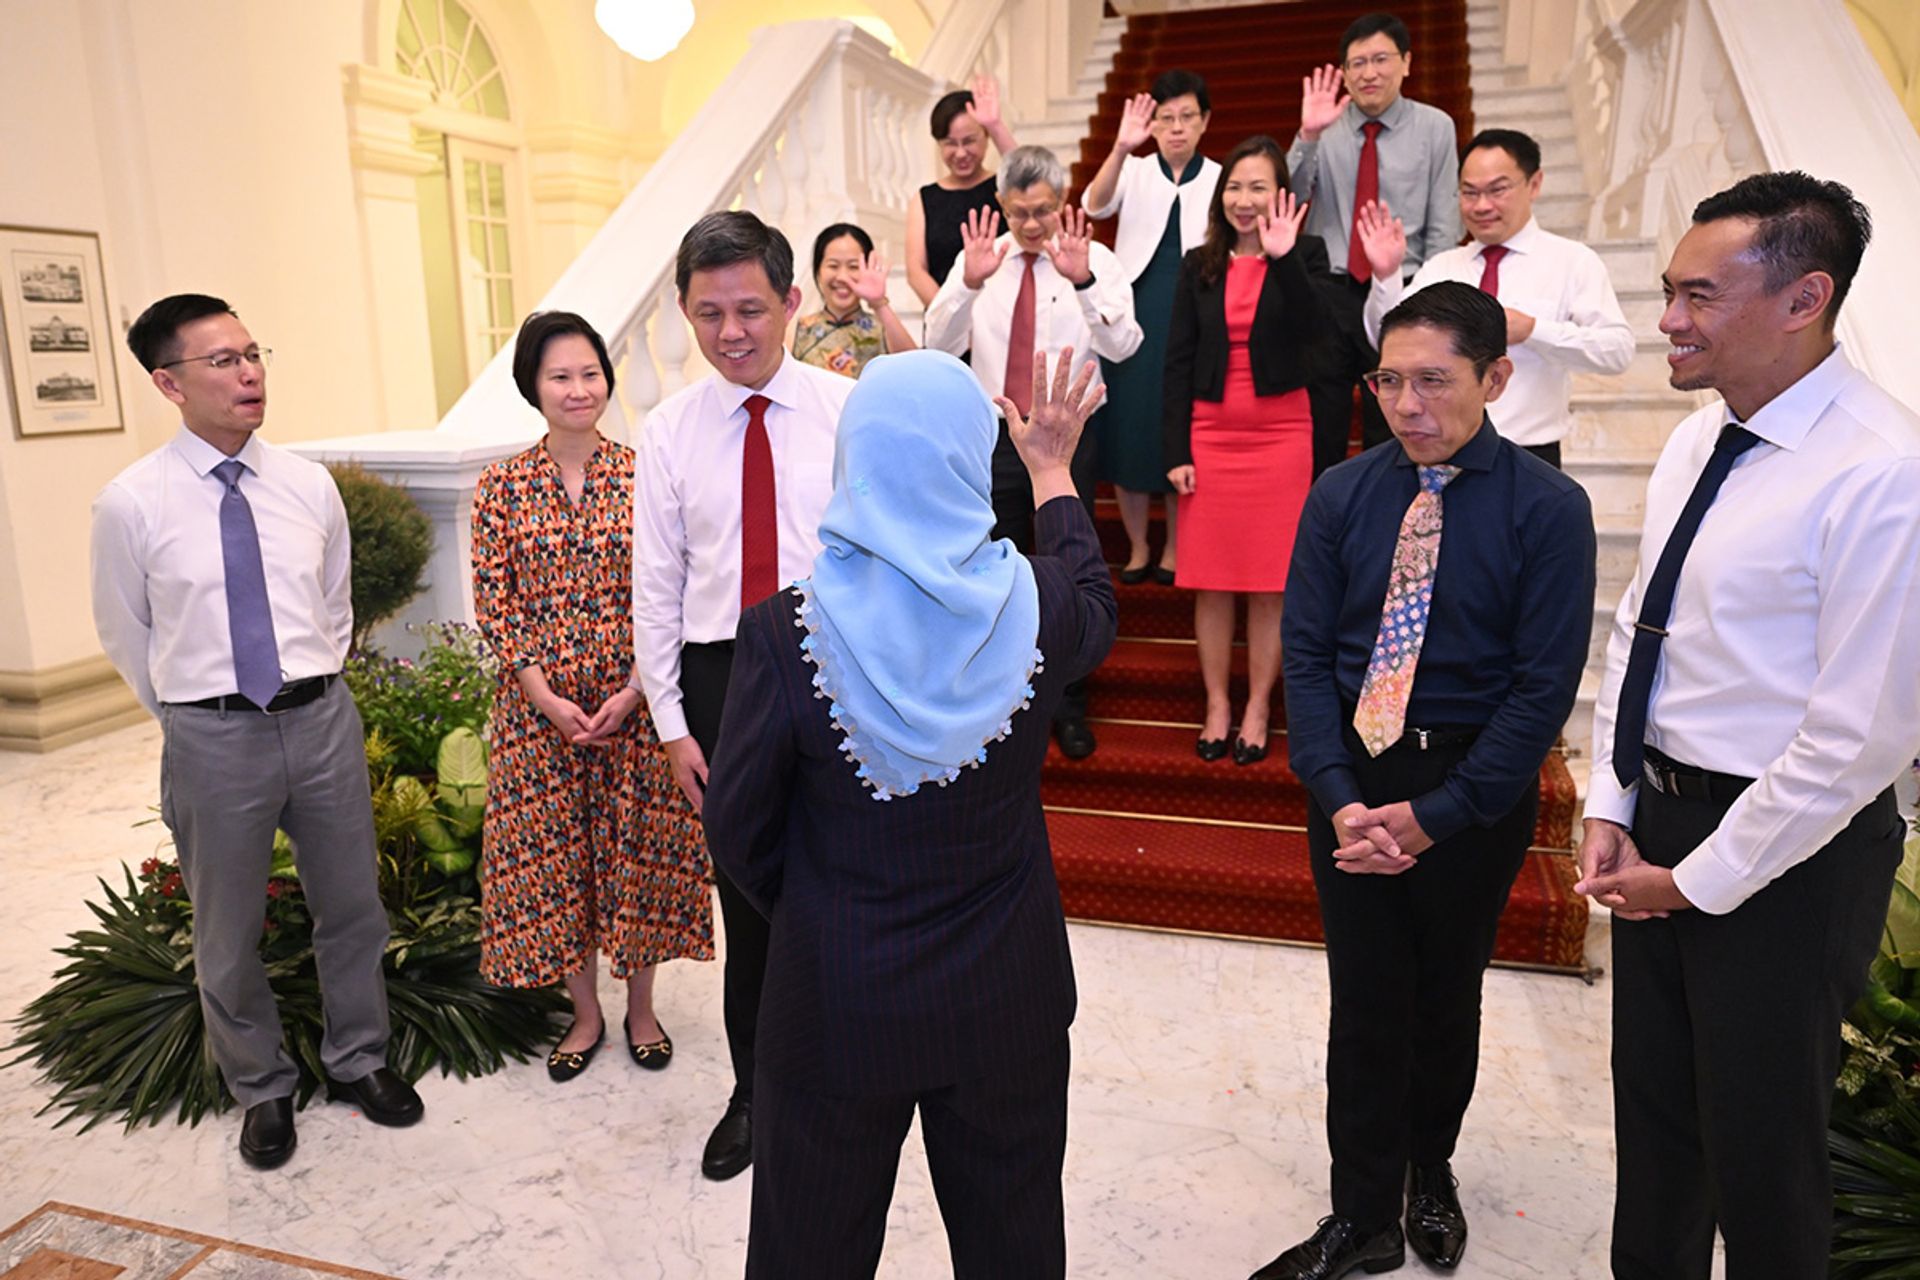 Madam Halimah waving at political leaders and members of the senior management of the Ministry of Education at the Istana during the Teachers’ Day Reception on Aug 31, 2023. ST PHOTO: AZMI ATHNI